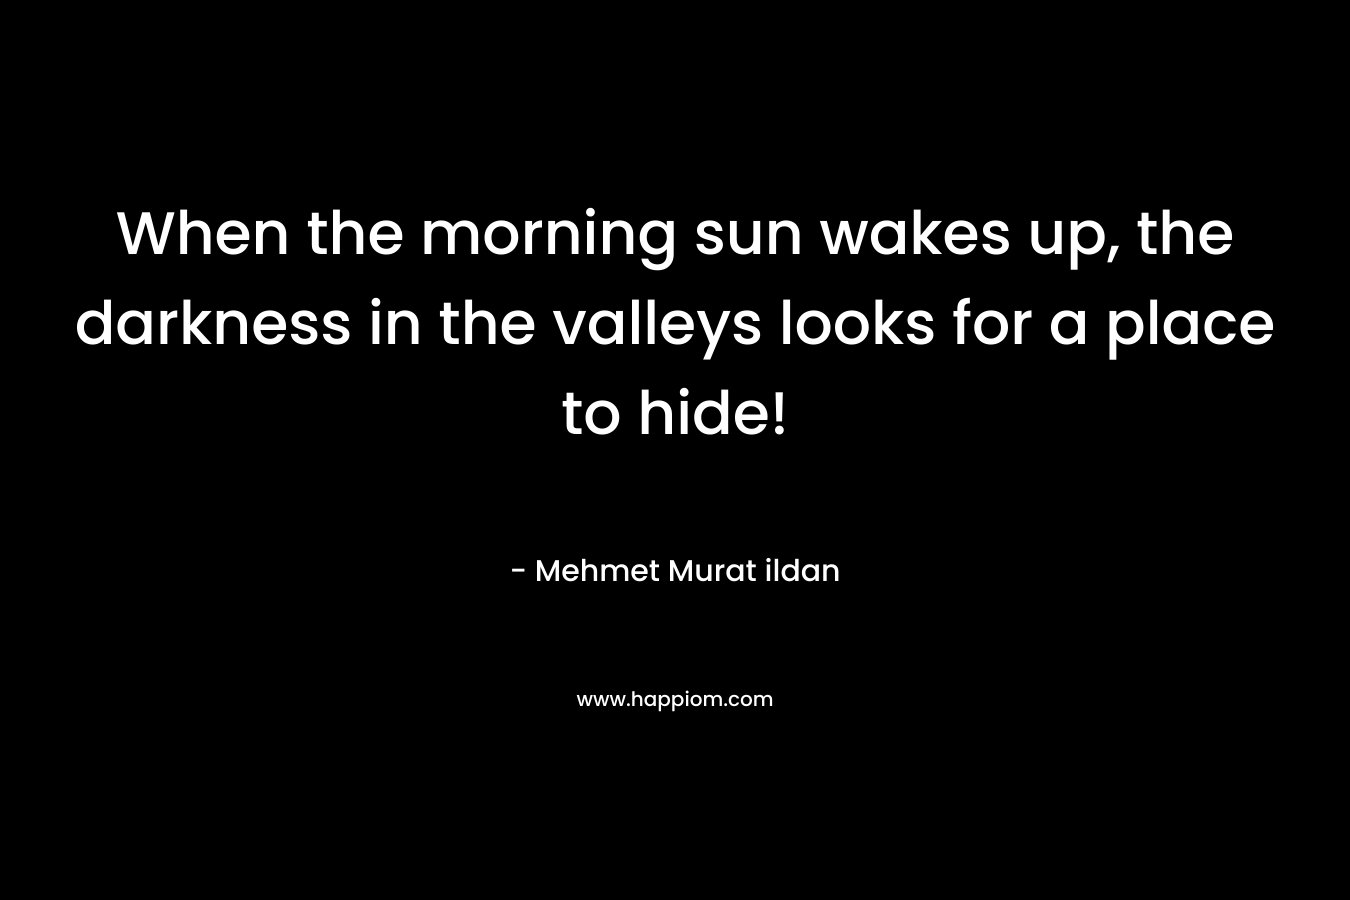 When the morning sun wakes up, the darkness in the valleys looks for a place to hide!